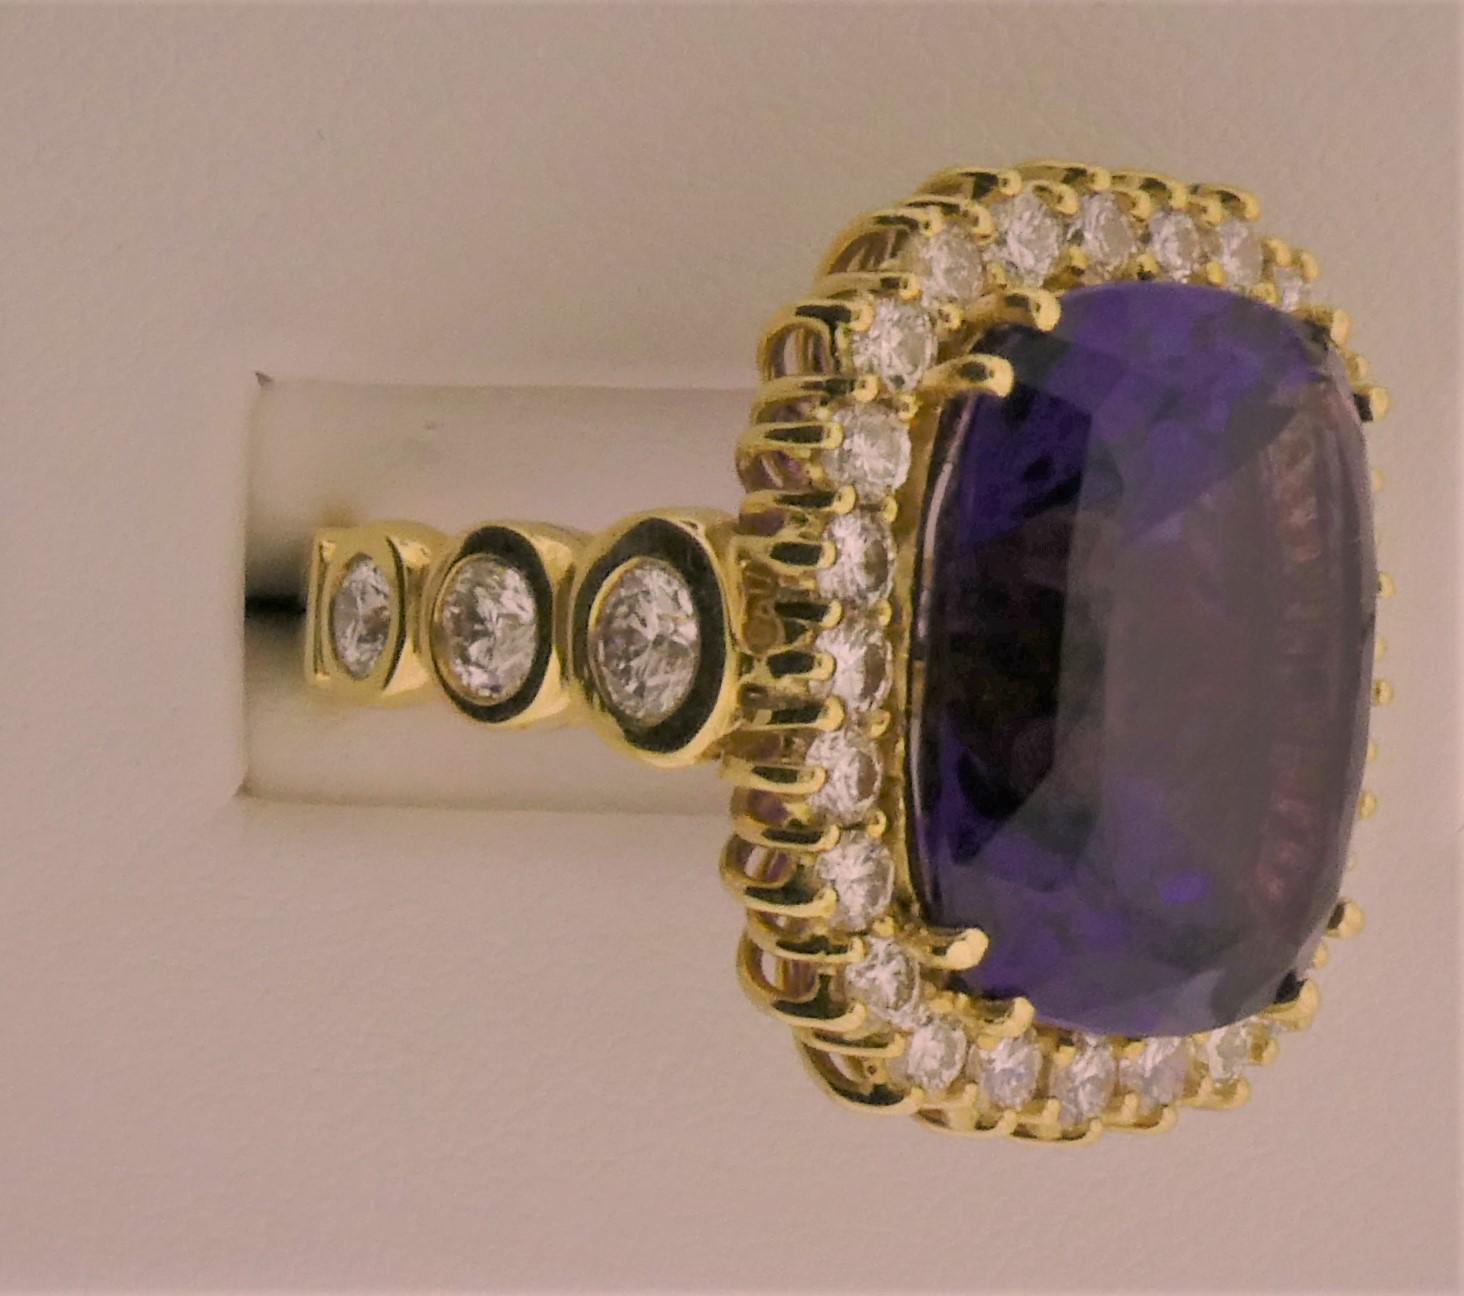 Amethyst '16.12 Cts', Diamond '33=2.86 Cts', 18K Yellow Gold Ring In New Condition For Sale In West Palm Beach, FL